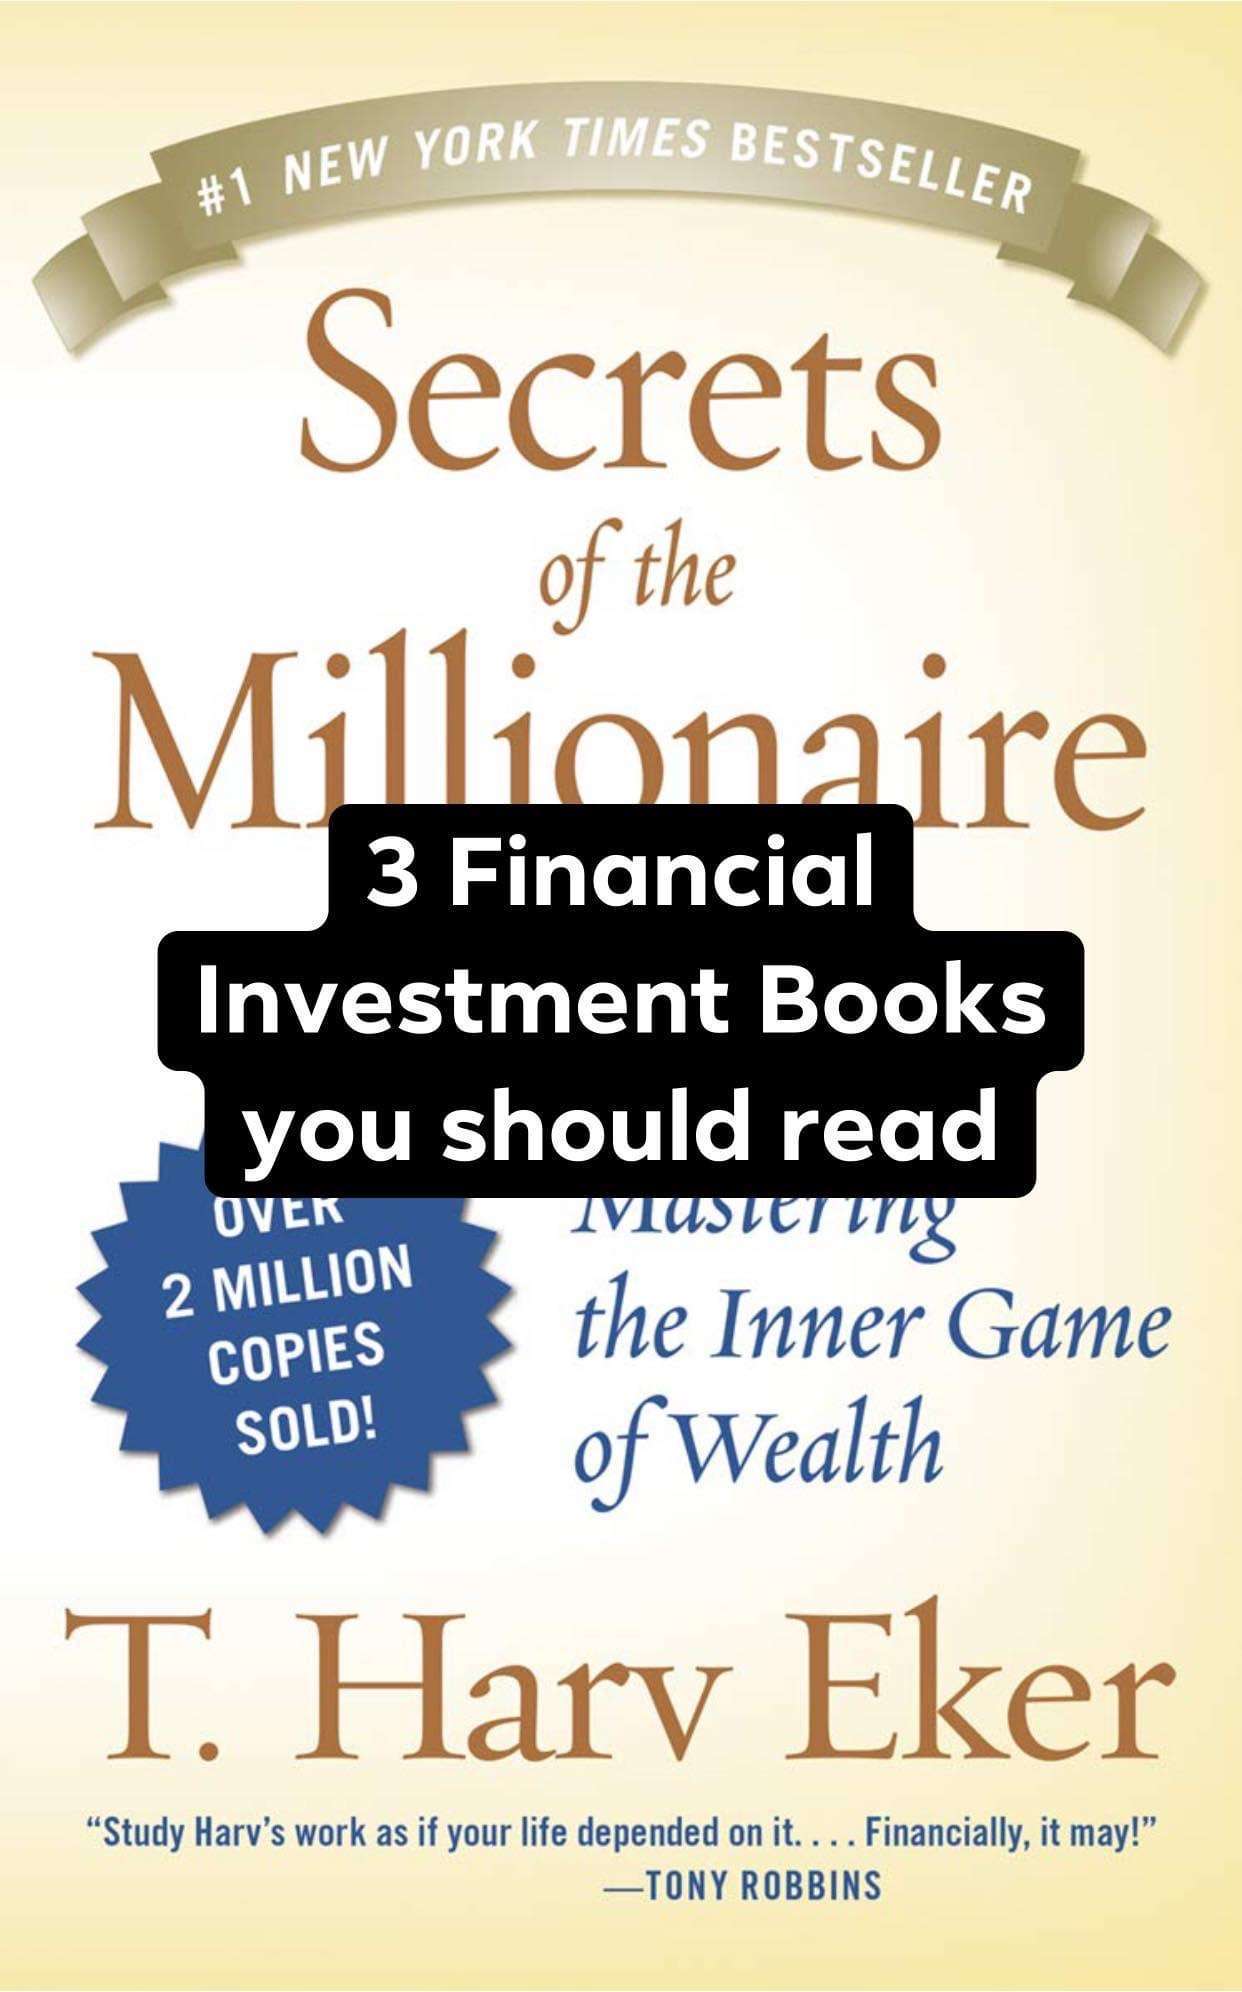 3 FINANCIAL INVESTMENT BOOKS YOU SHOULD READ